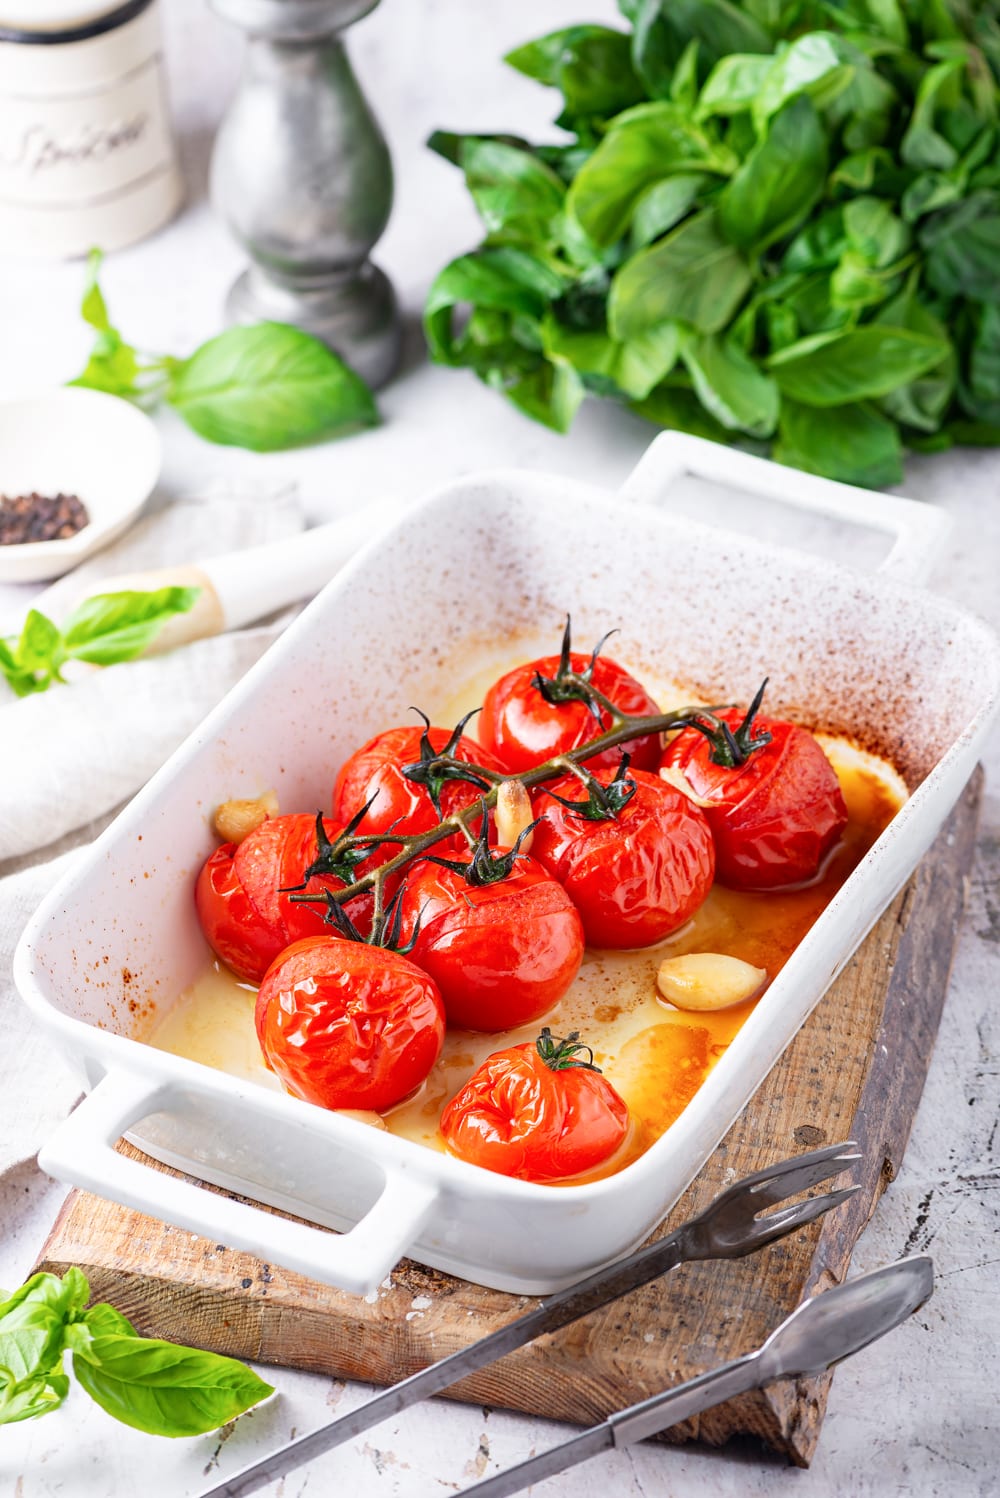 Tomatoes and garlic that have been cooked in a white baking dish with basil leaves behind it.